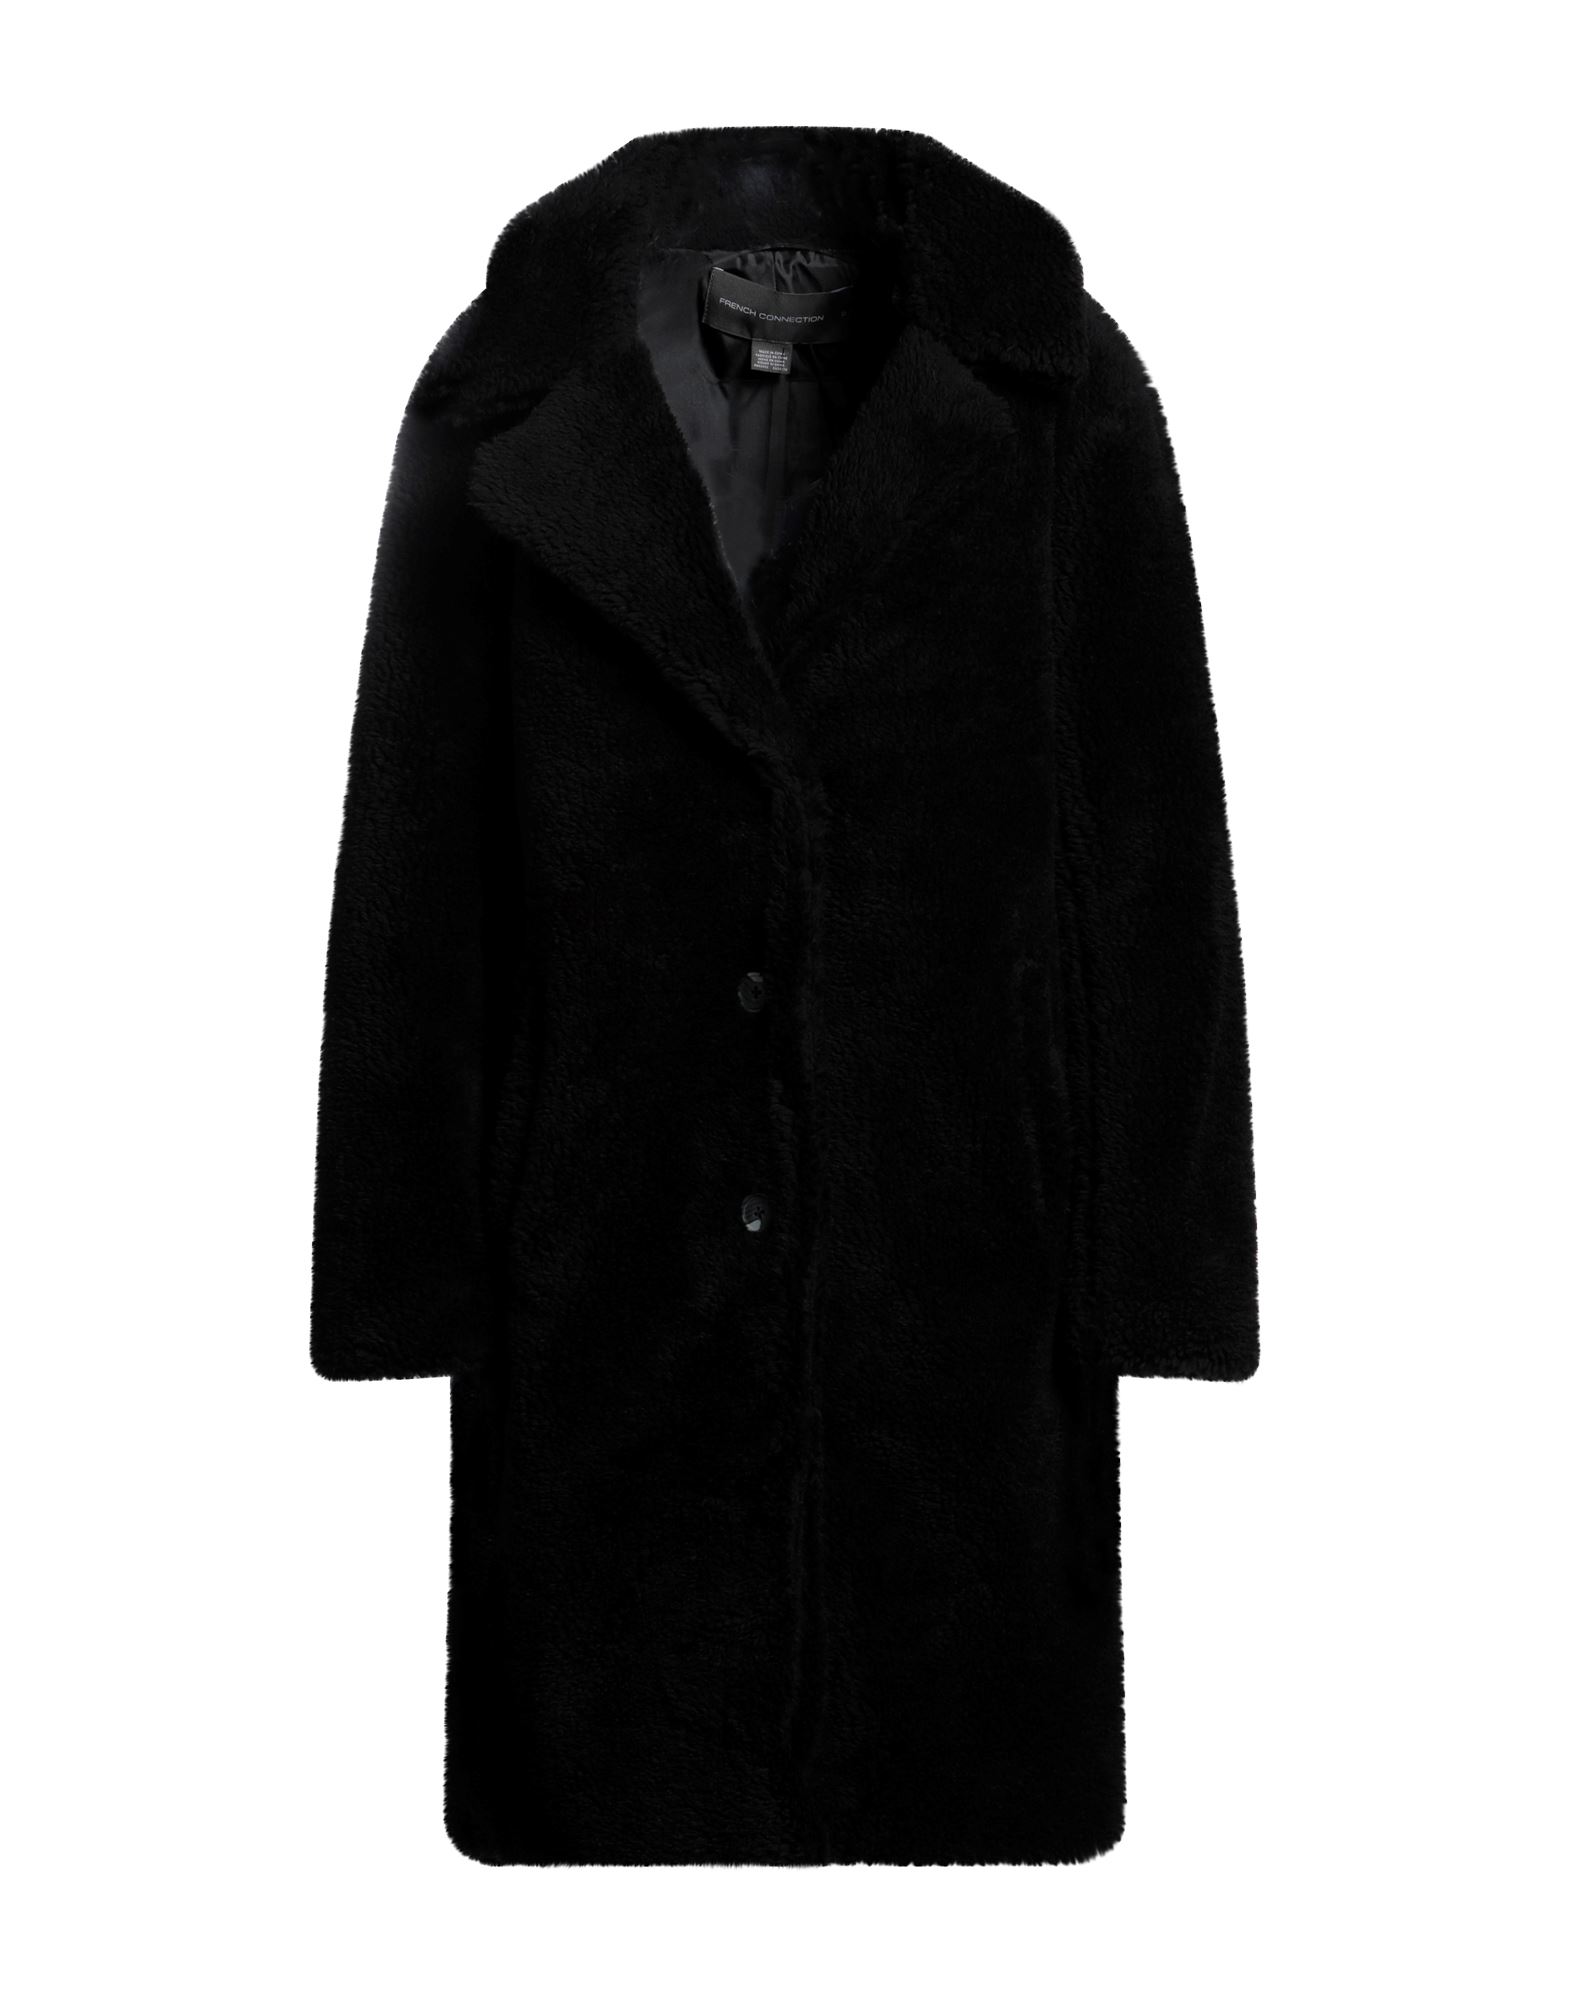 FRENCH CONNECTION Shearling- & Kunstfell Damen Schwarz von FRENCH CONNECTION